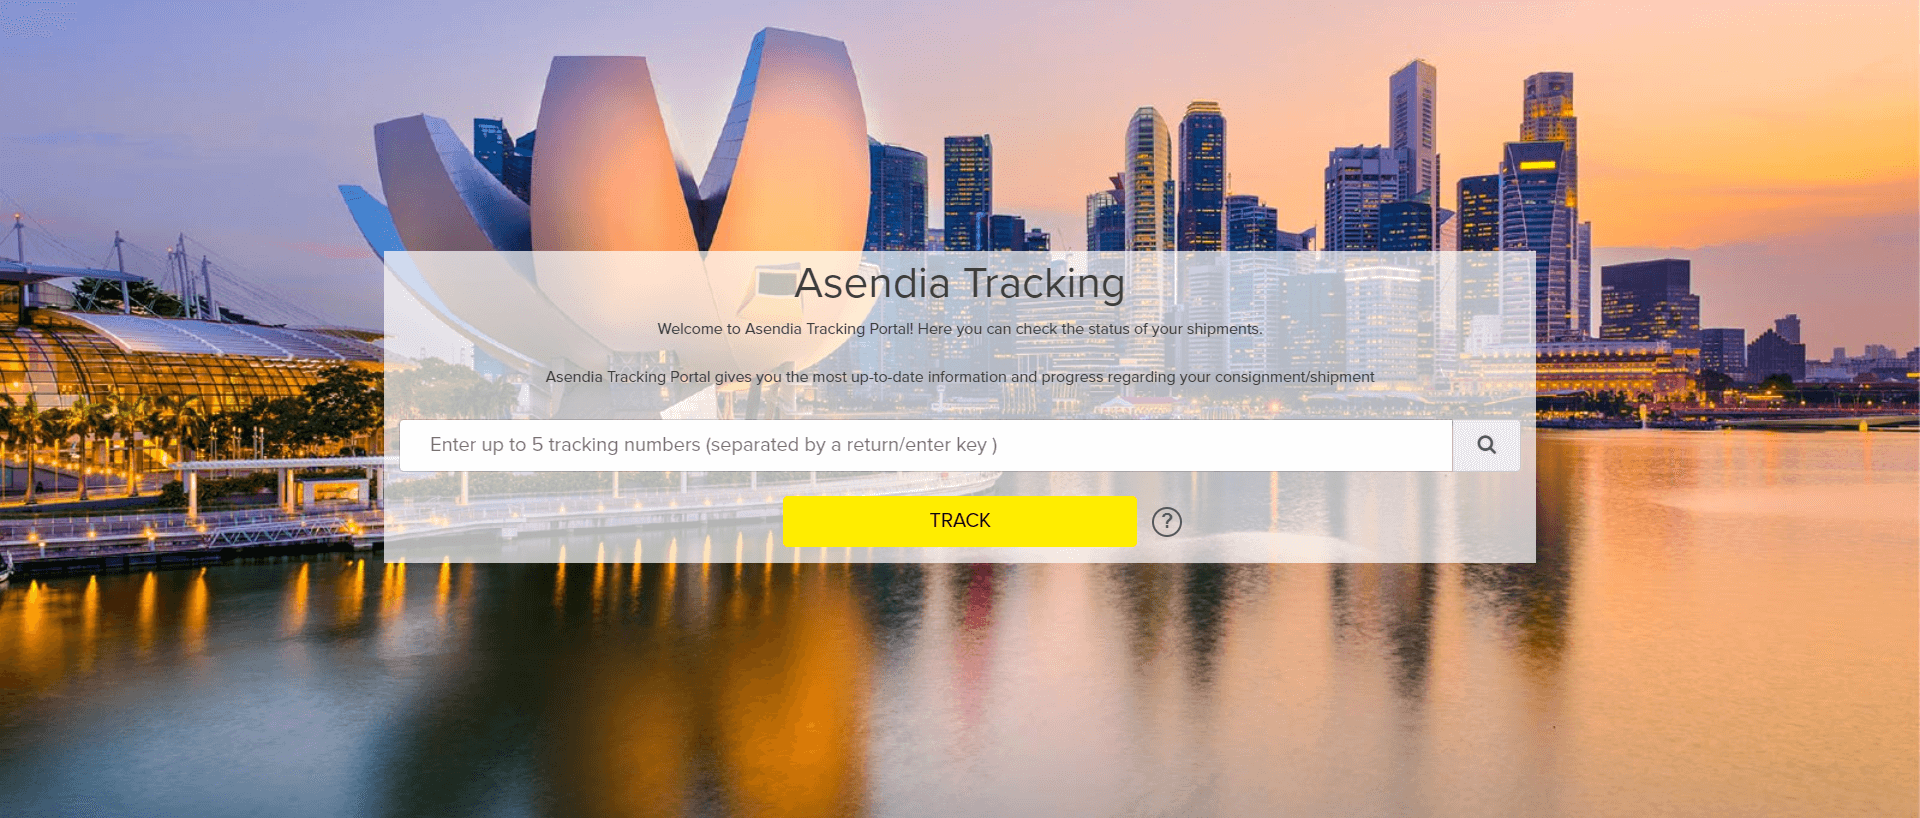 Asendia tracking page